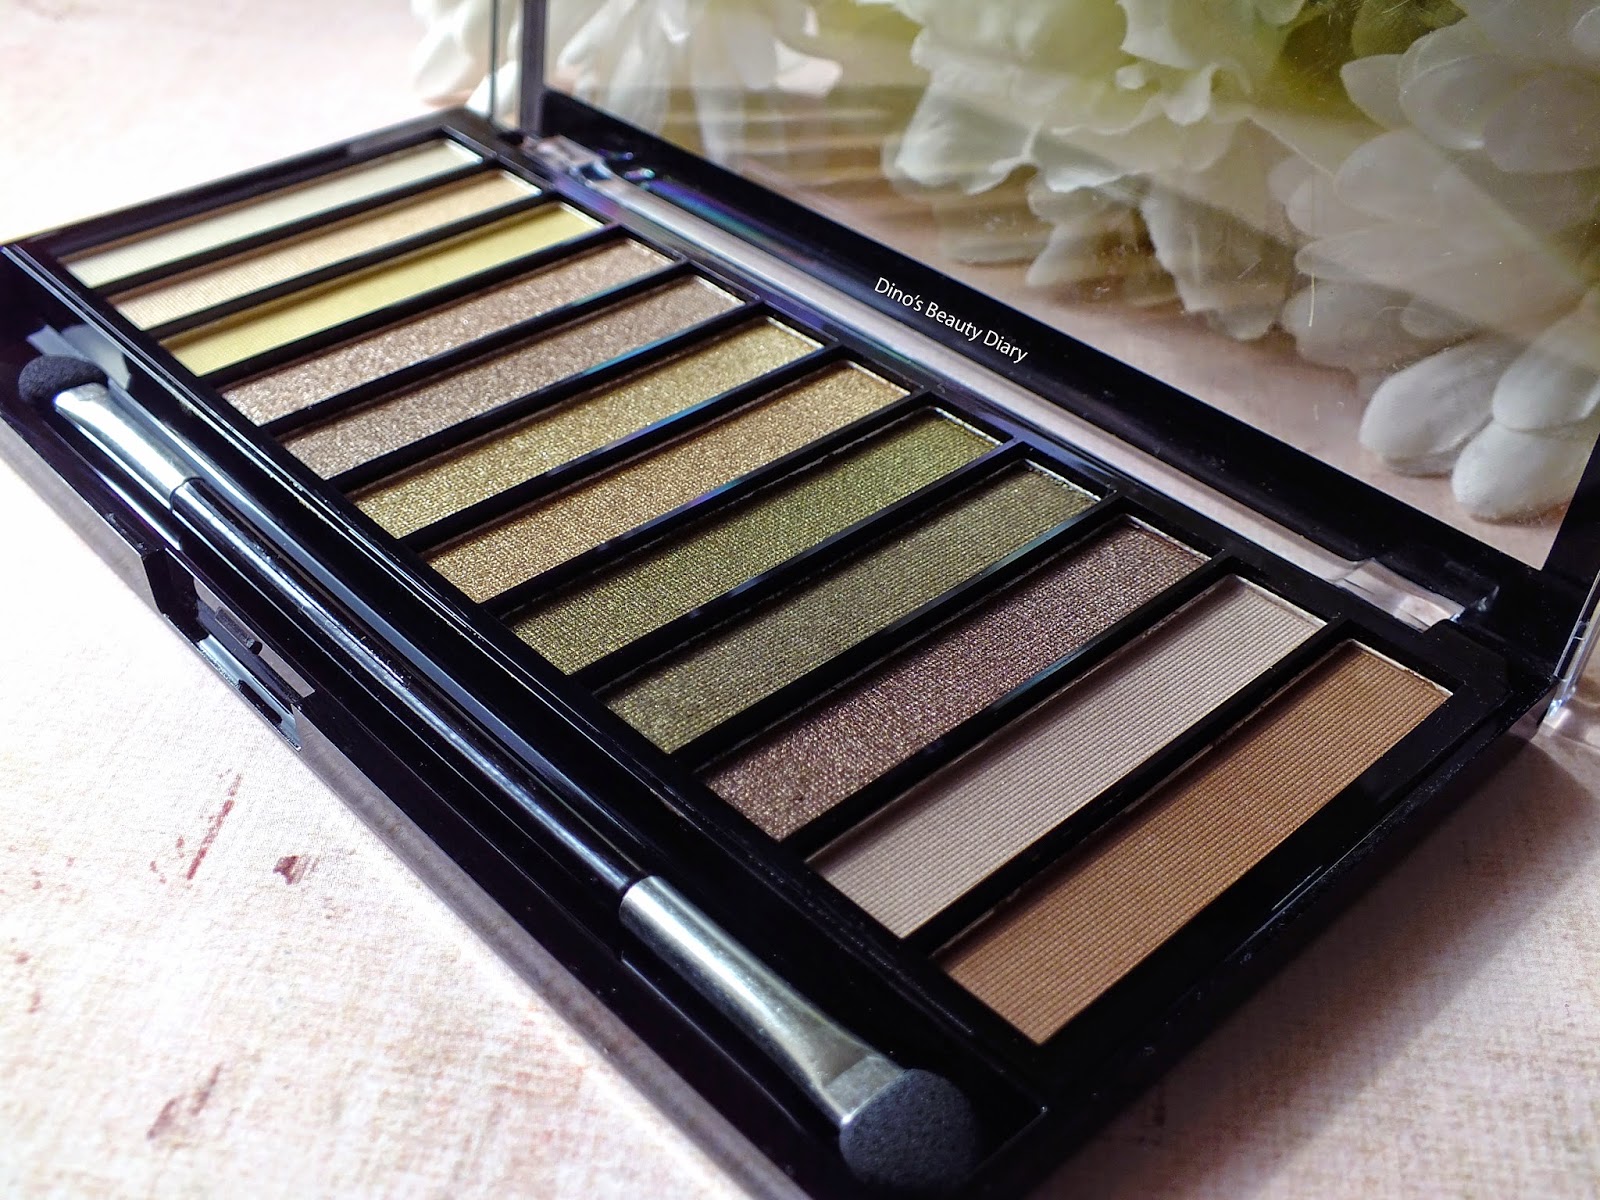 Dino's Beauty Diary - Make-Up Review - Makeup Revolution 'Iconic Dreams' Palette